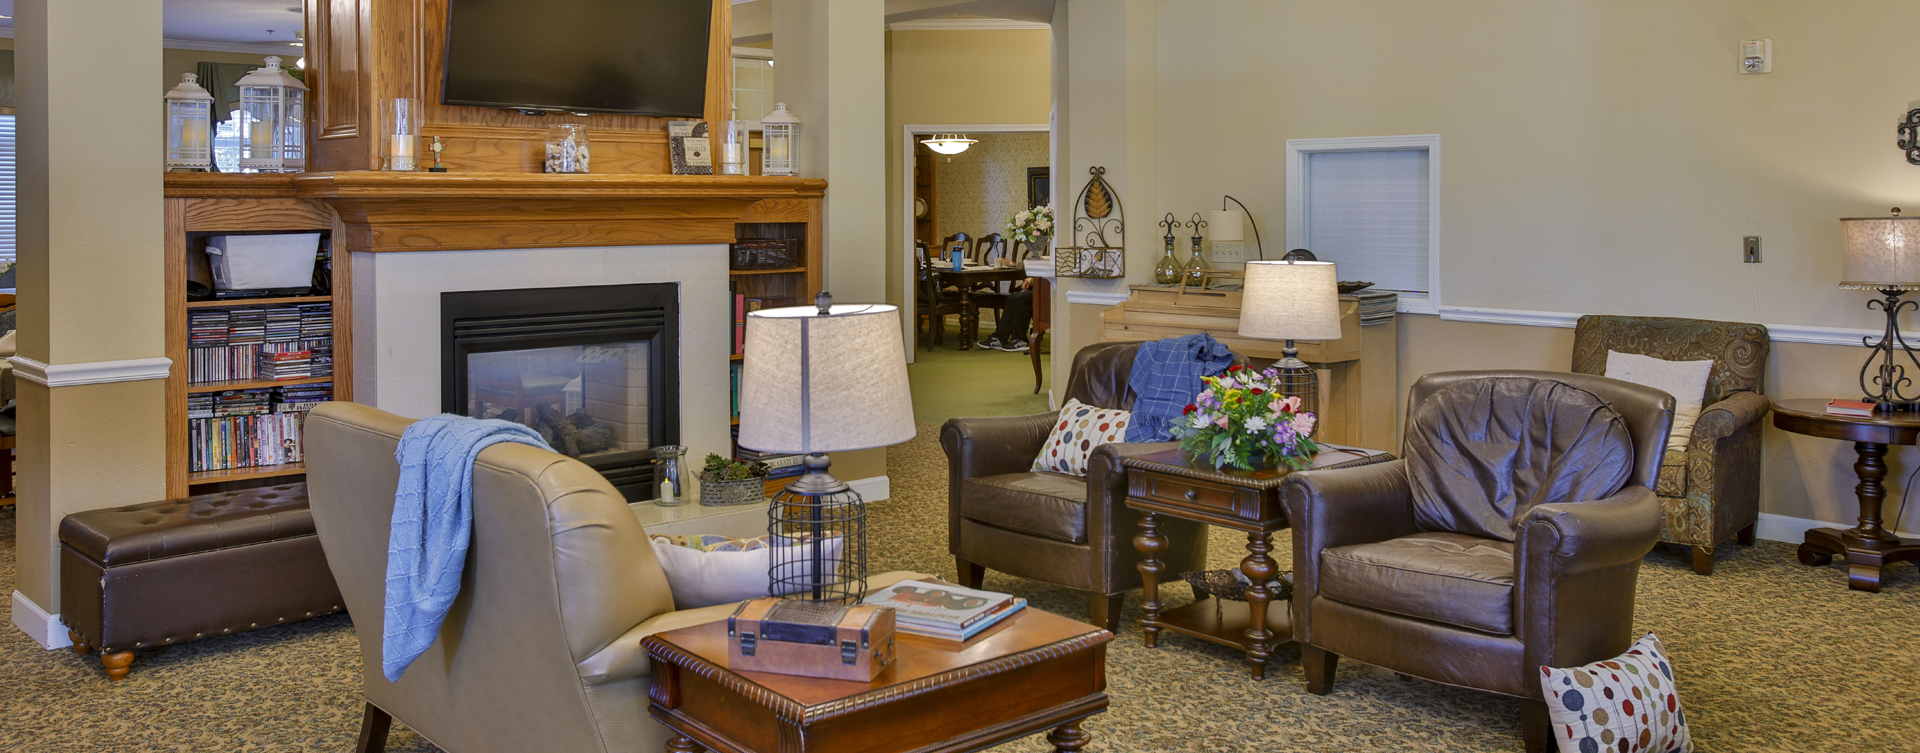 Socialize with friends in the living room at Bickford of Crawfordsville